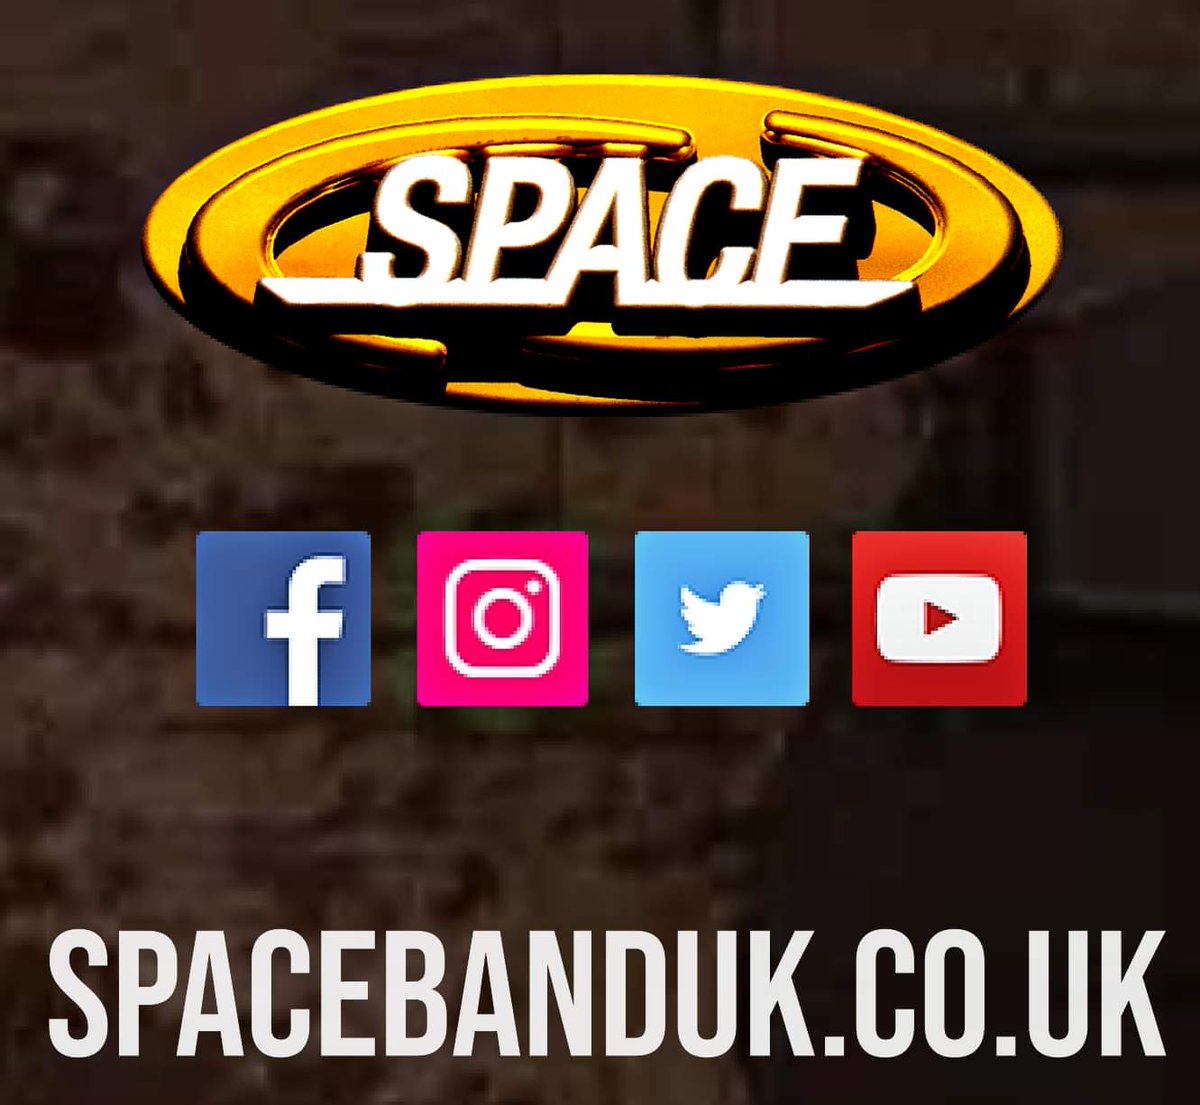 #Space Subscribe For Space News spacebanduk.co.uk